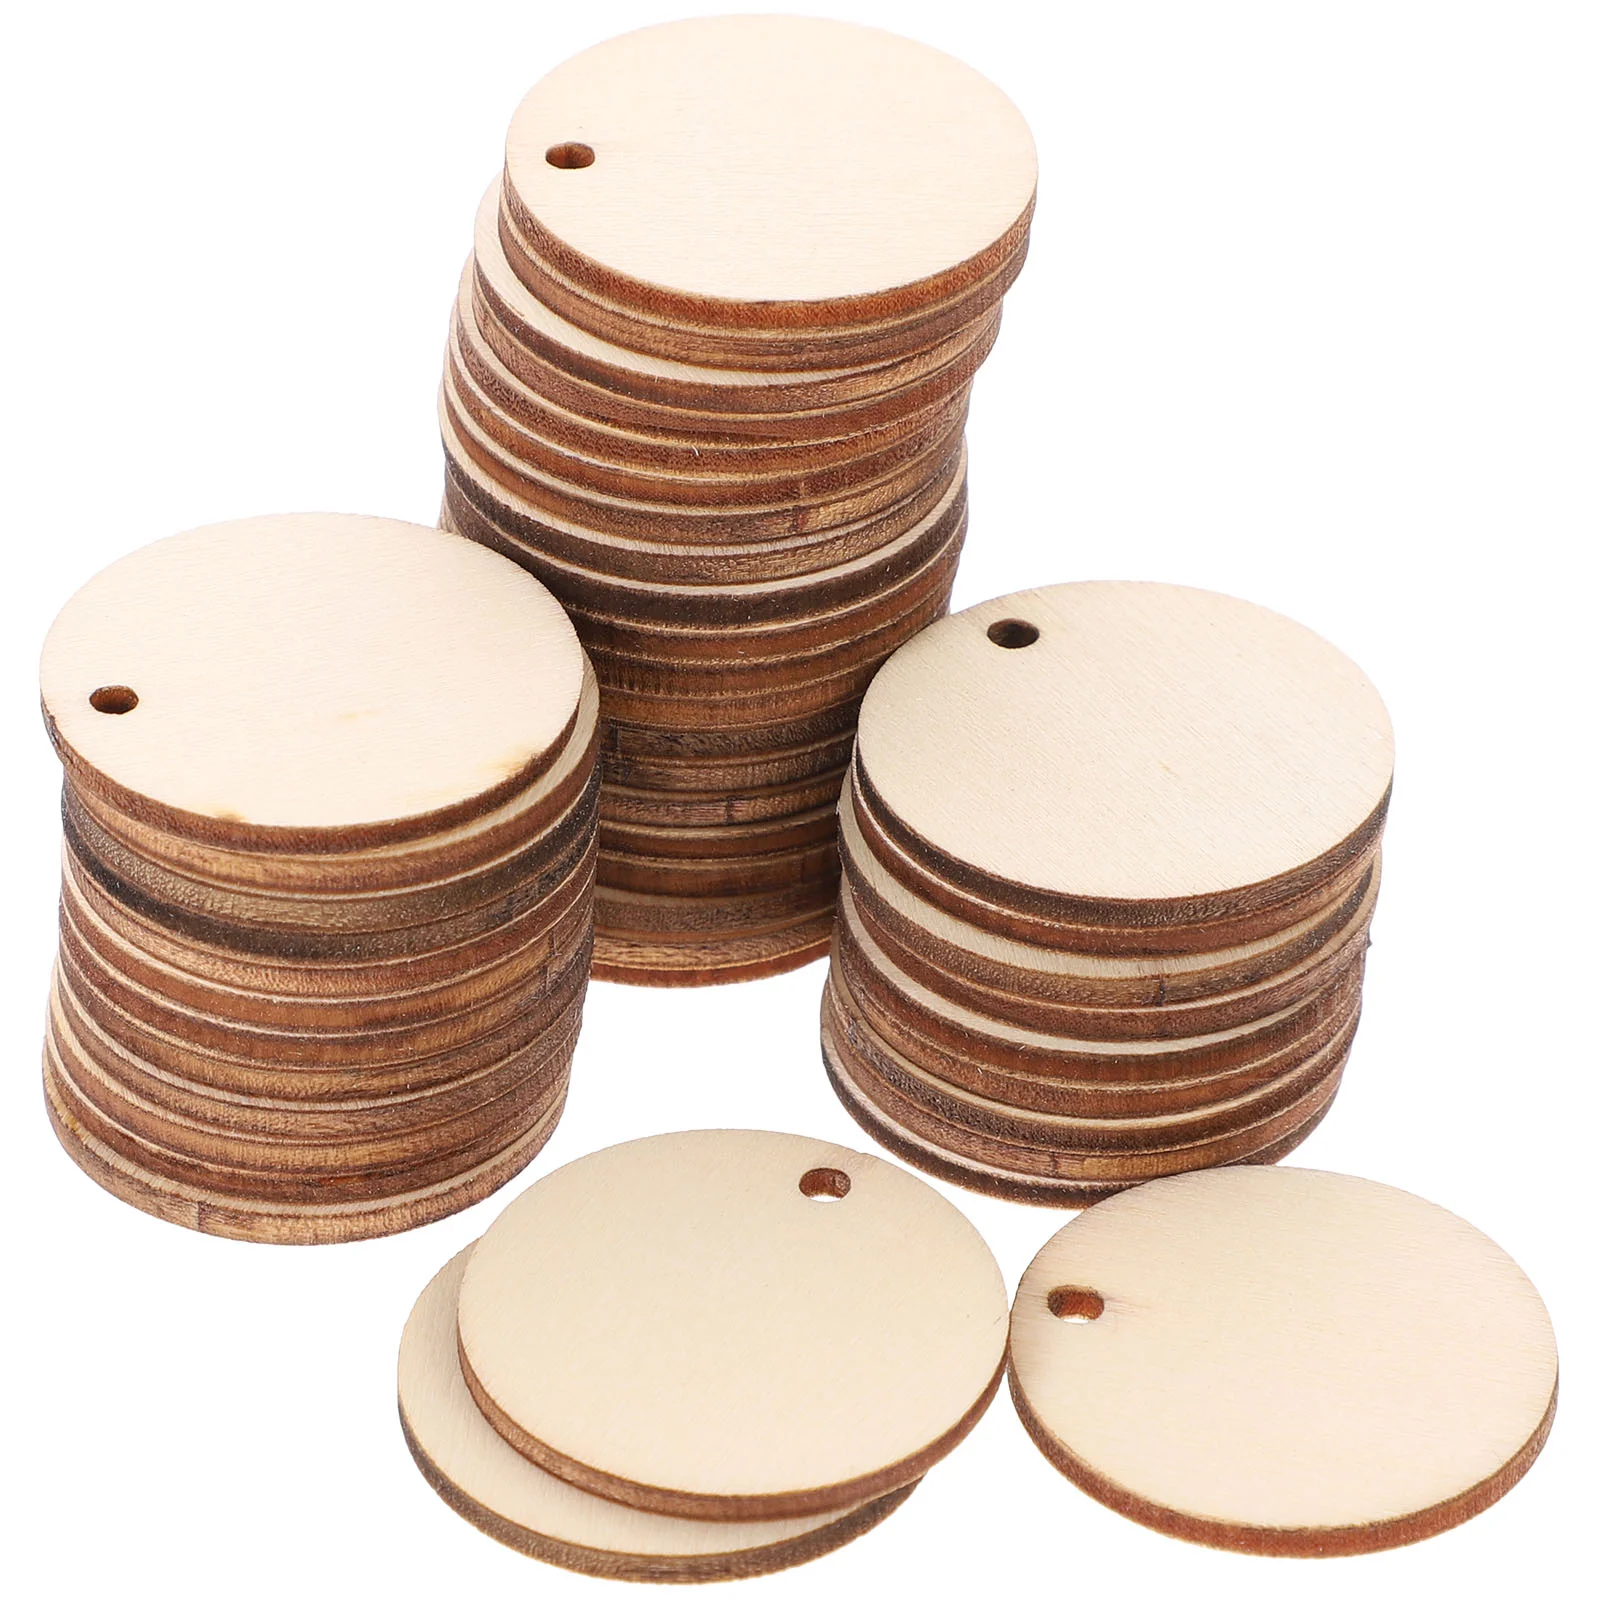 

Wood Woodenslice Round Circles Craftsdiy Piece Unfinished Ornaments Craft Tags Discs Blank Hole Holes Log Slices Blanks Keyring